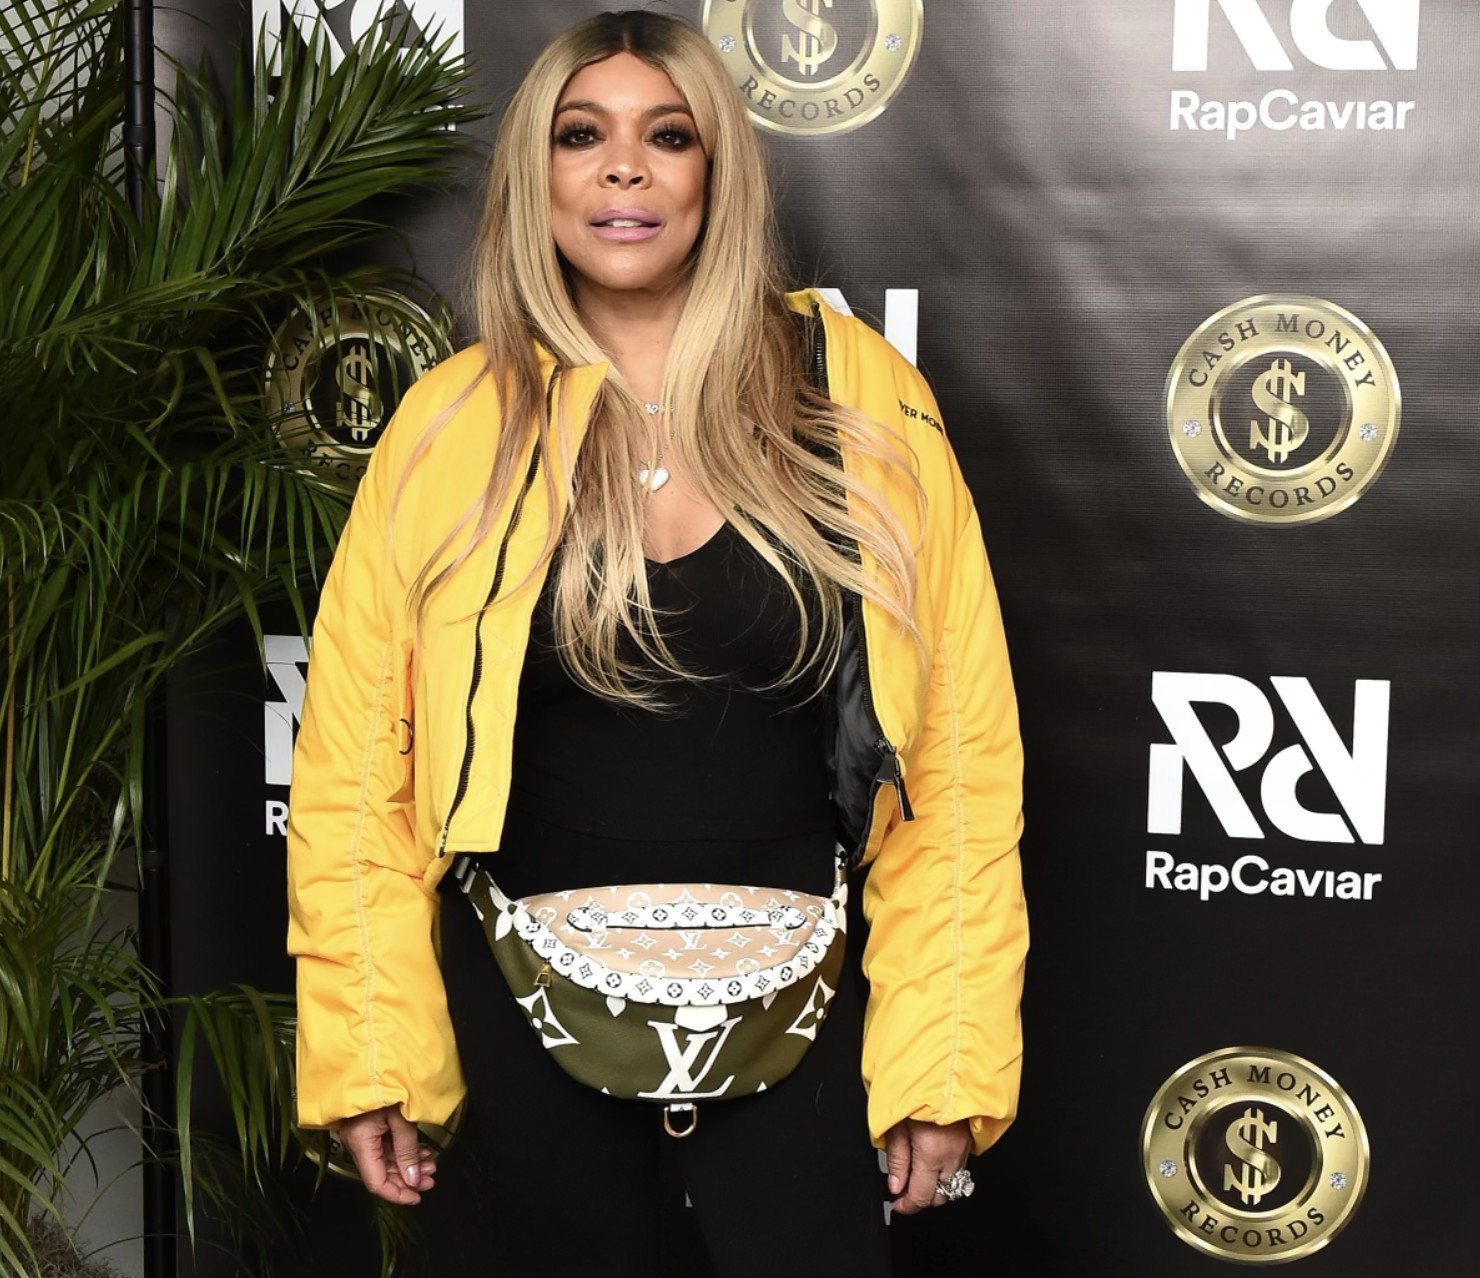 Wendy Williams Acted Inappropriately In Front Of Her Manager & Others While Drunk, Sources Say